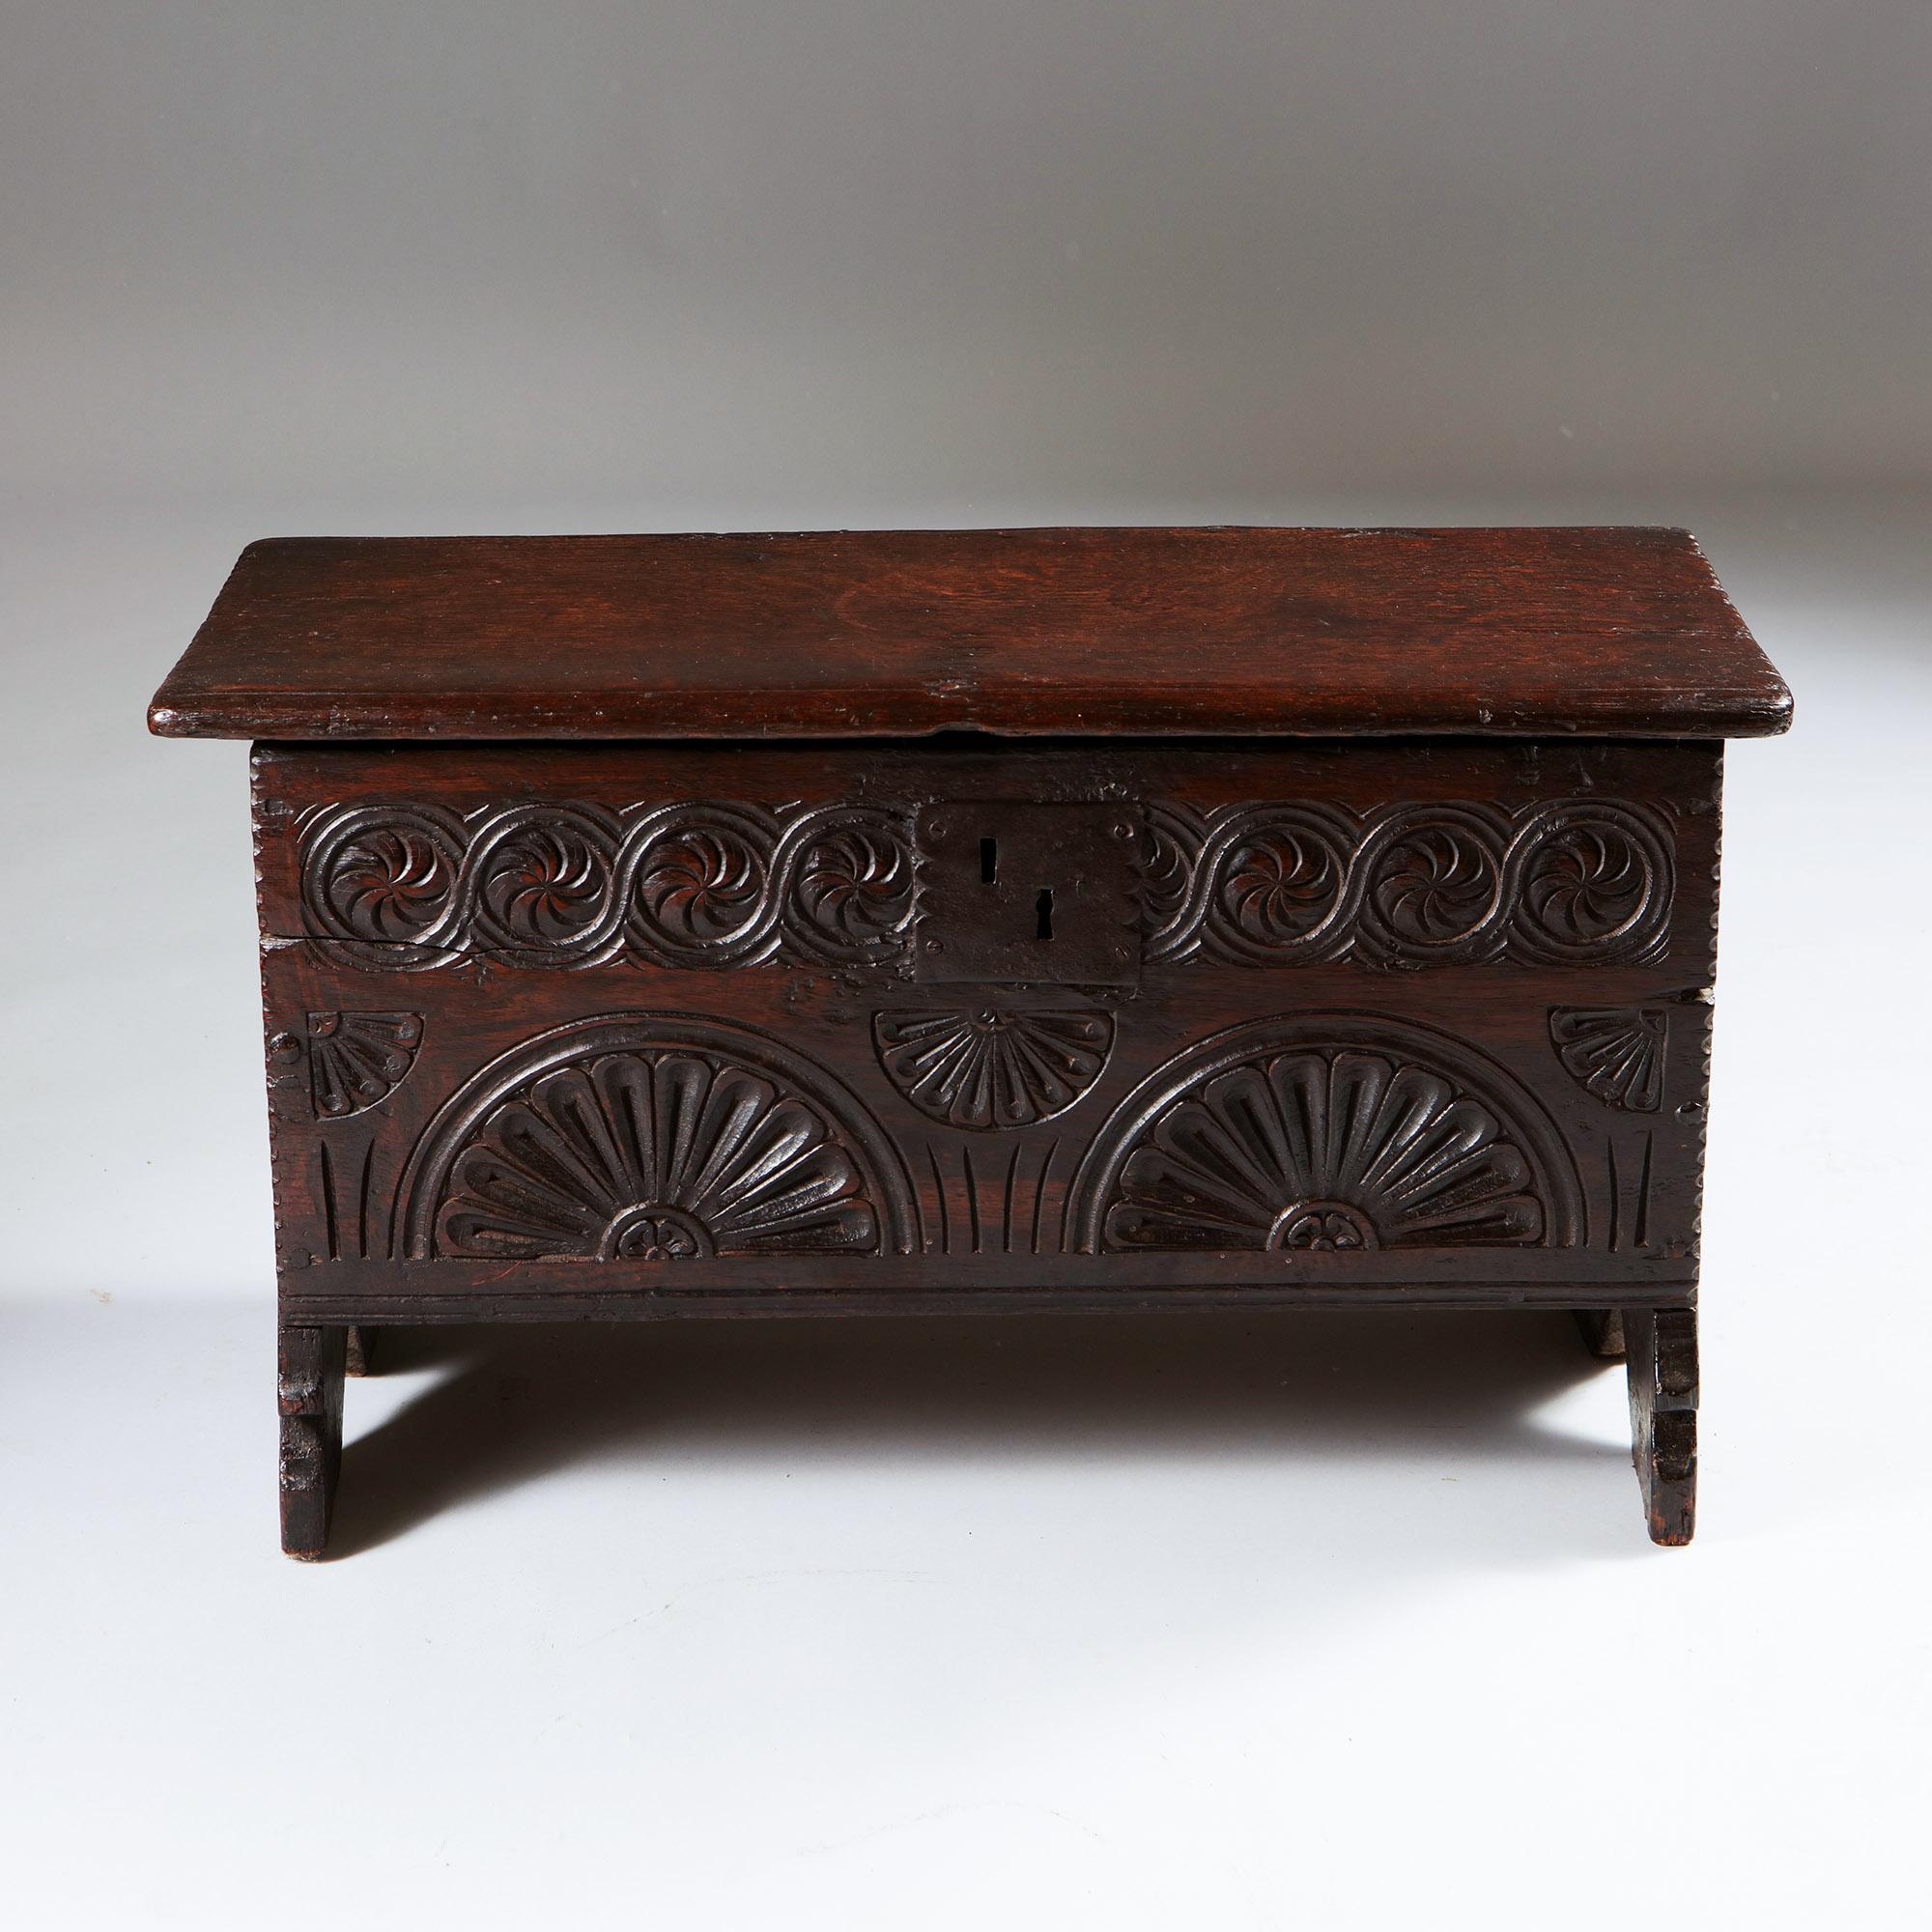 A Rare 17th Century Charles II Carved Oak Childs Coffer of Diminutive Proportion 1